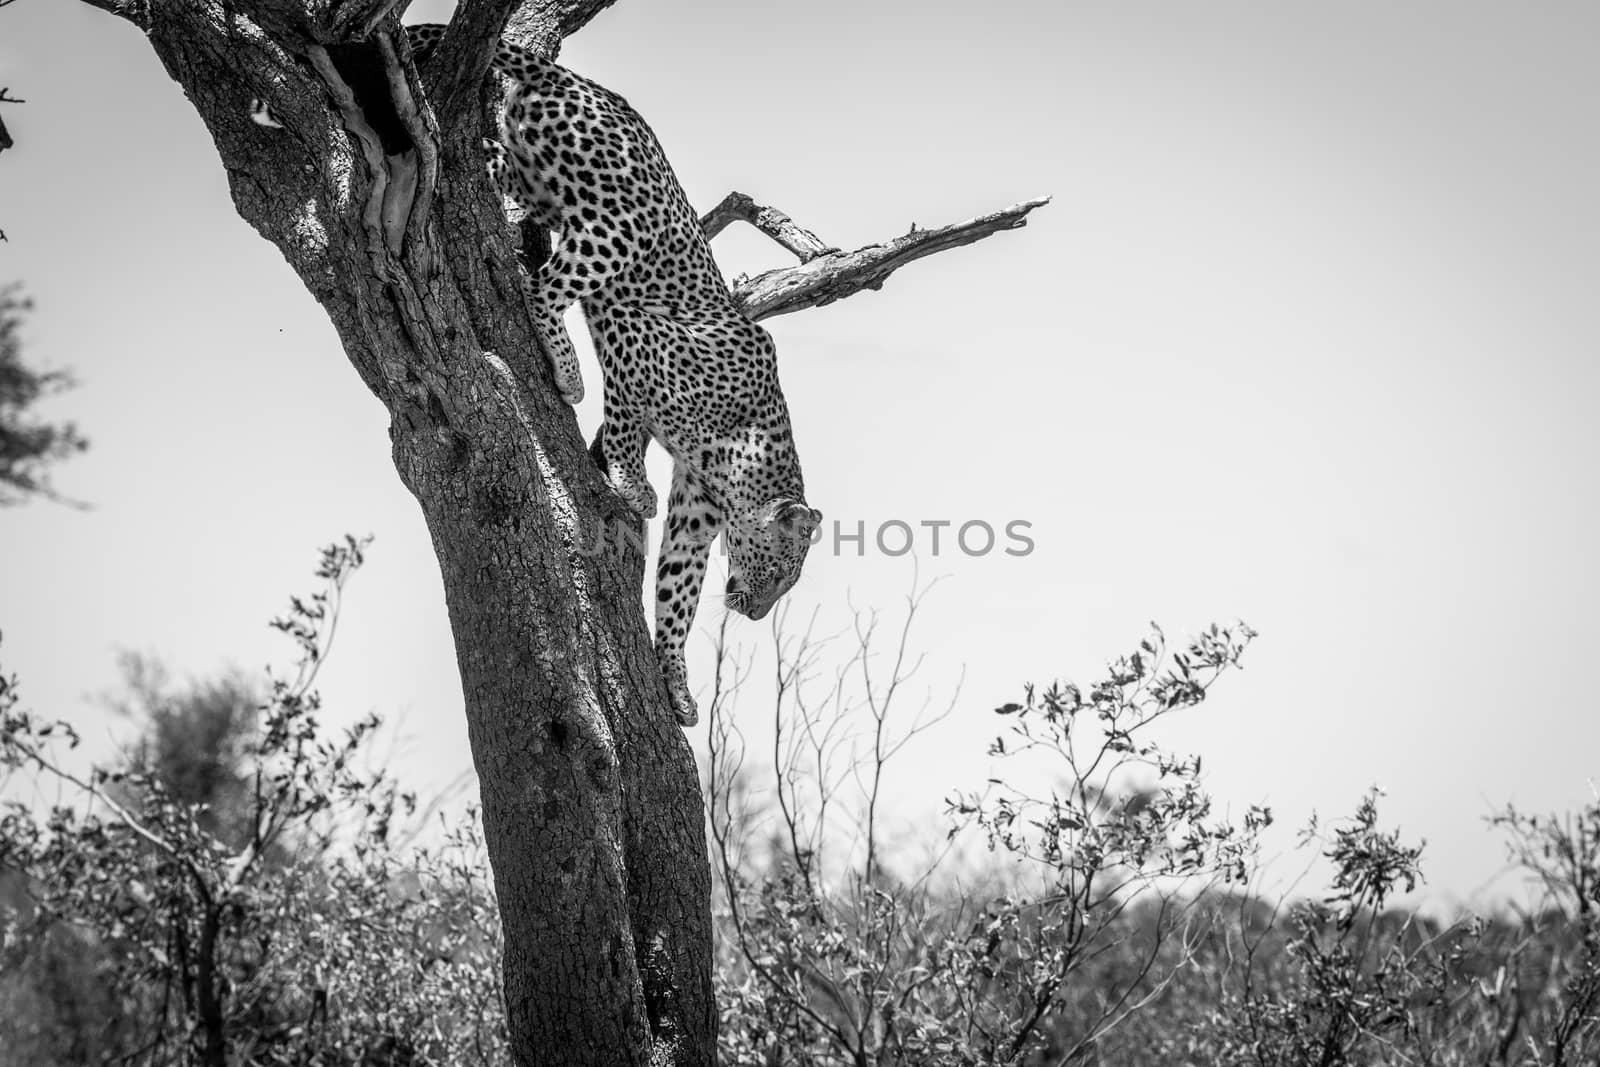 Leopard in a tree in black and white in the Kruger National Park, South Africa. by Simoneemanphotography